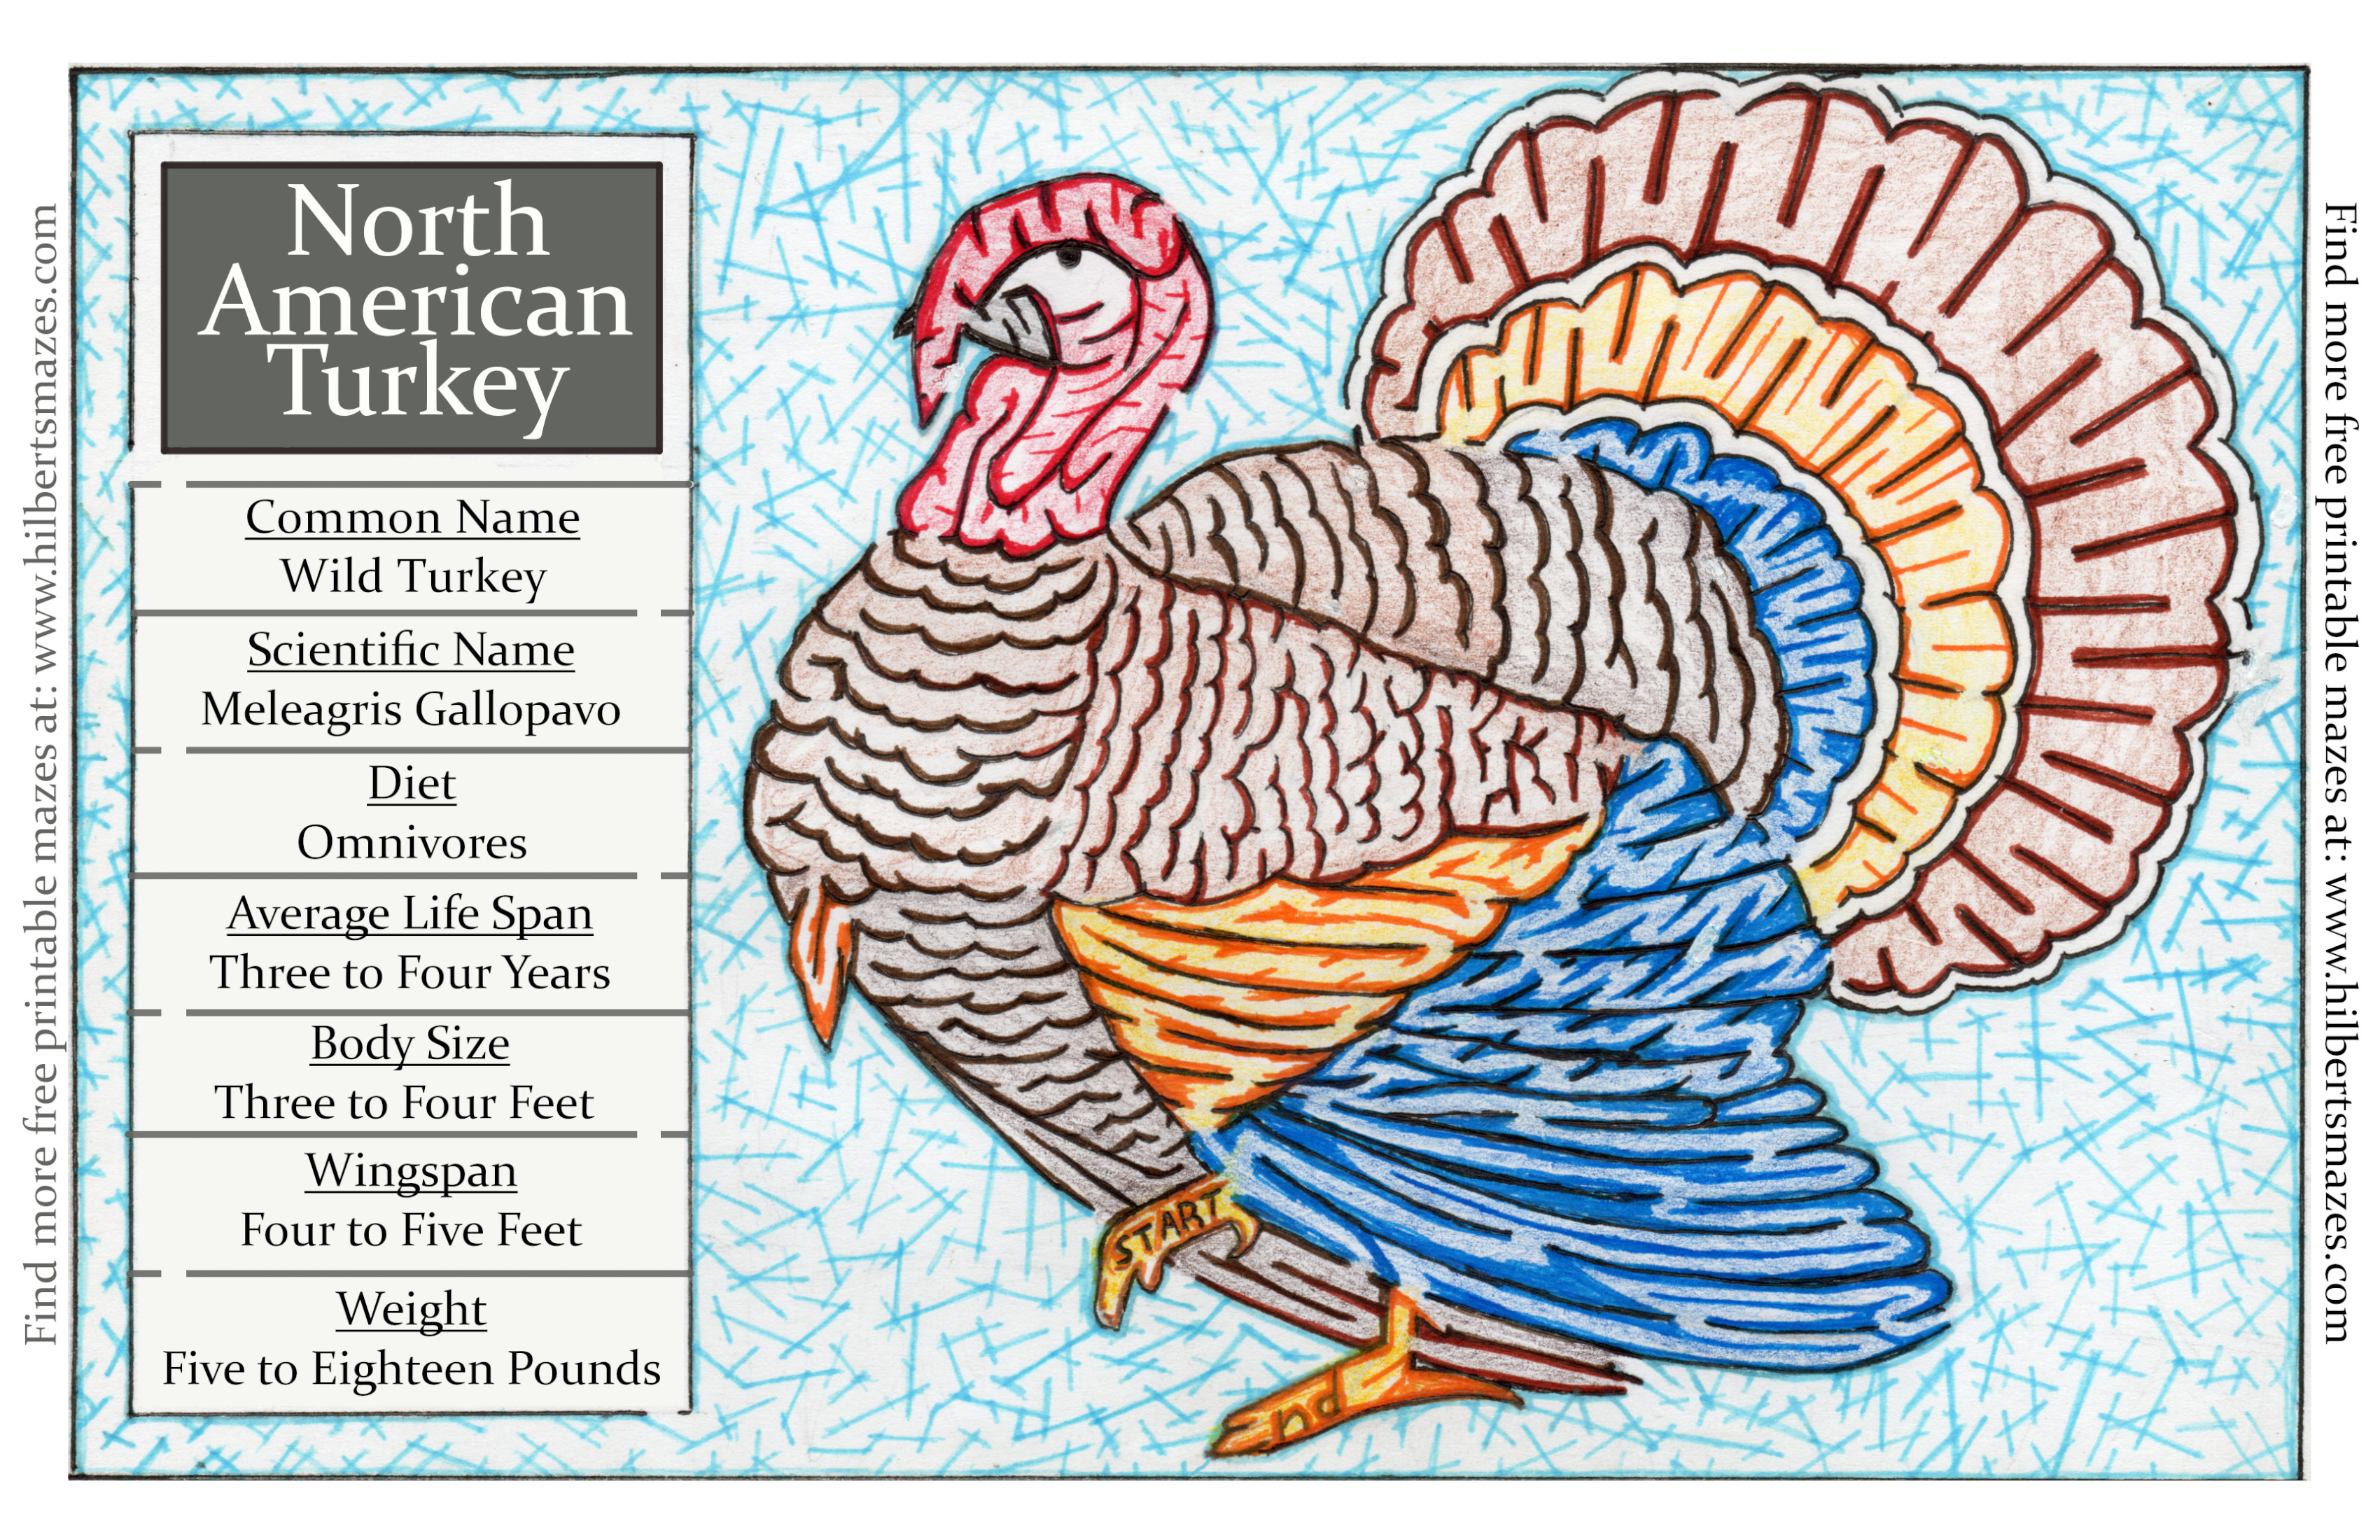 Free Printable Hand Drawn Turkey Maze. Easily downloadable and printable PDF format. Great Mazes for both kids & adults very challenging but fun.